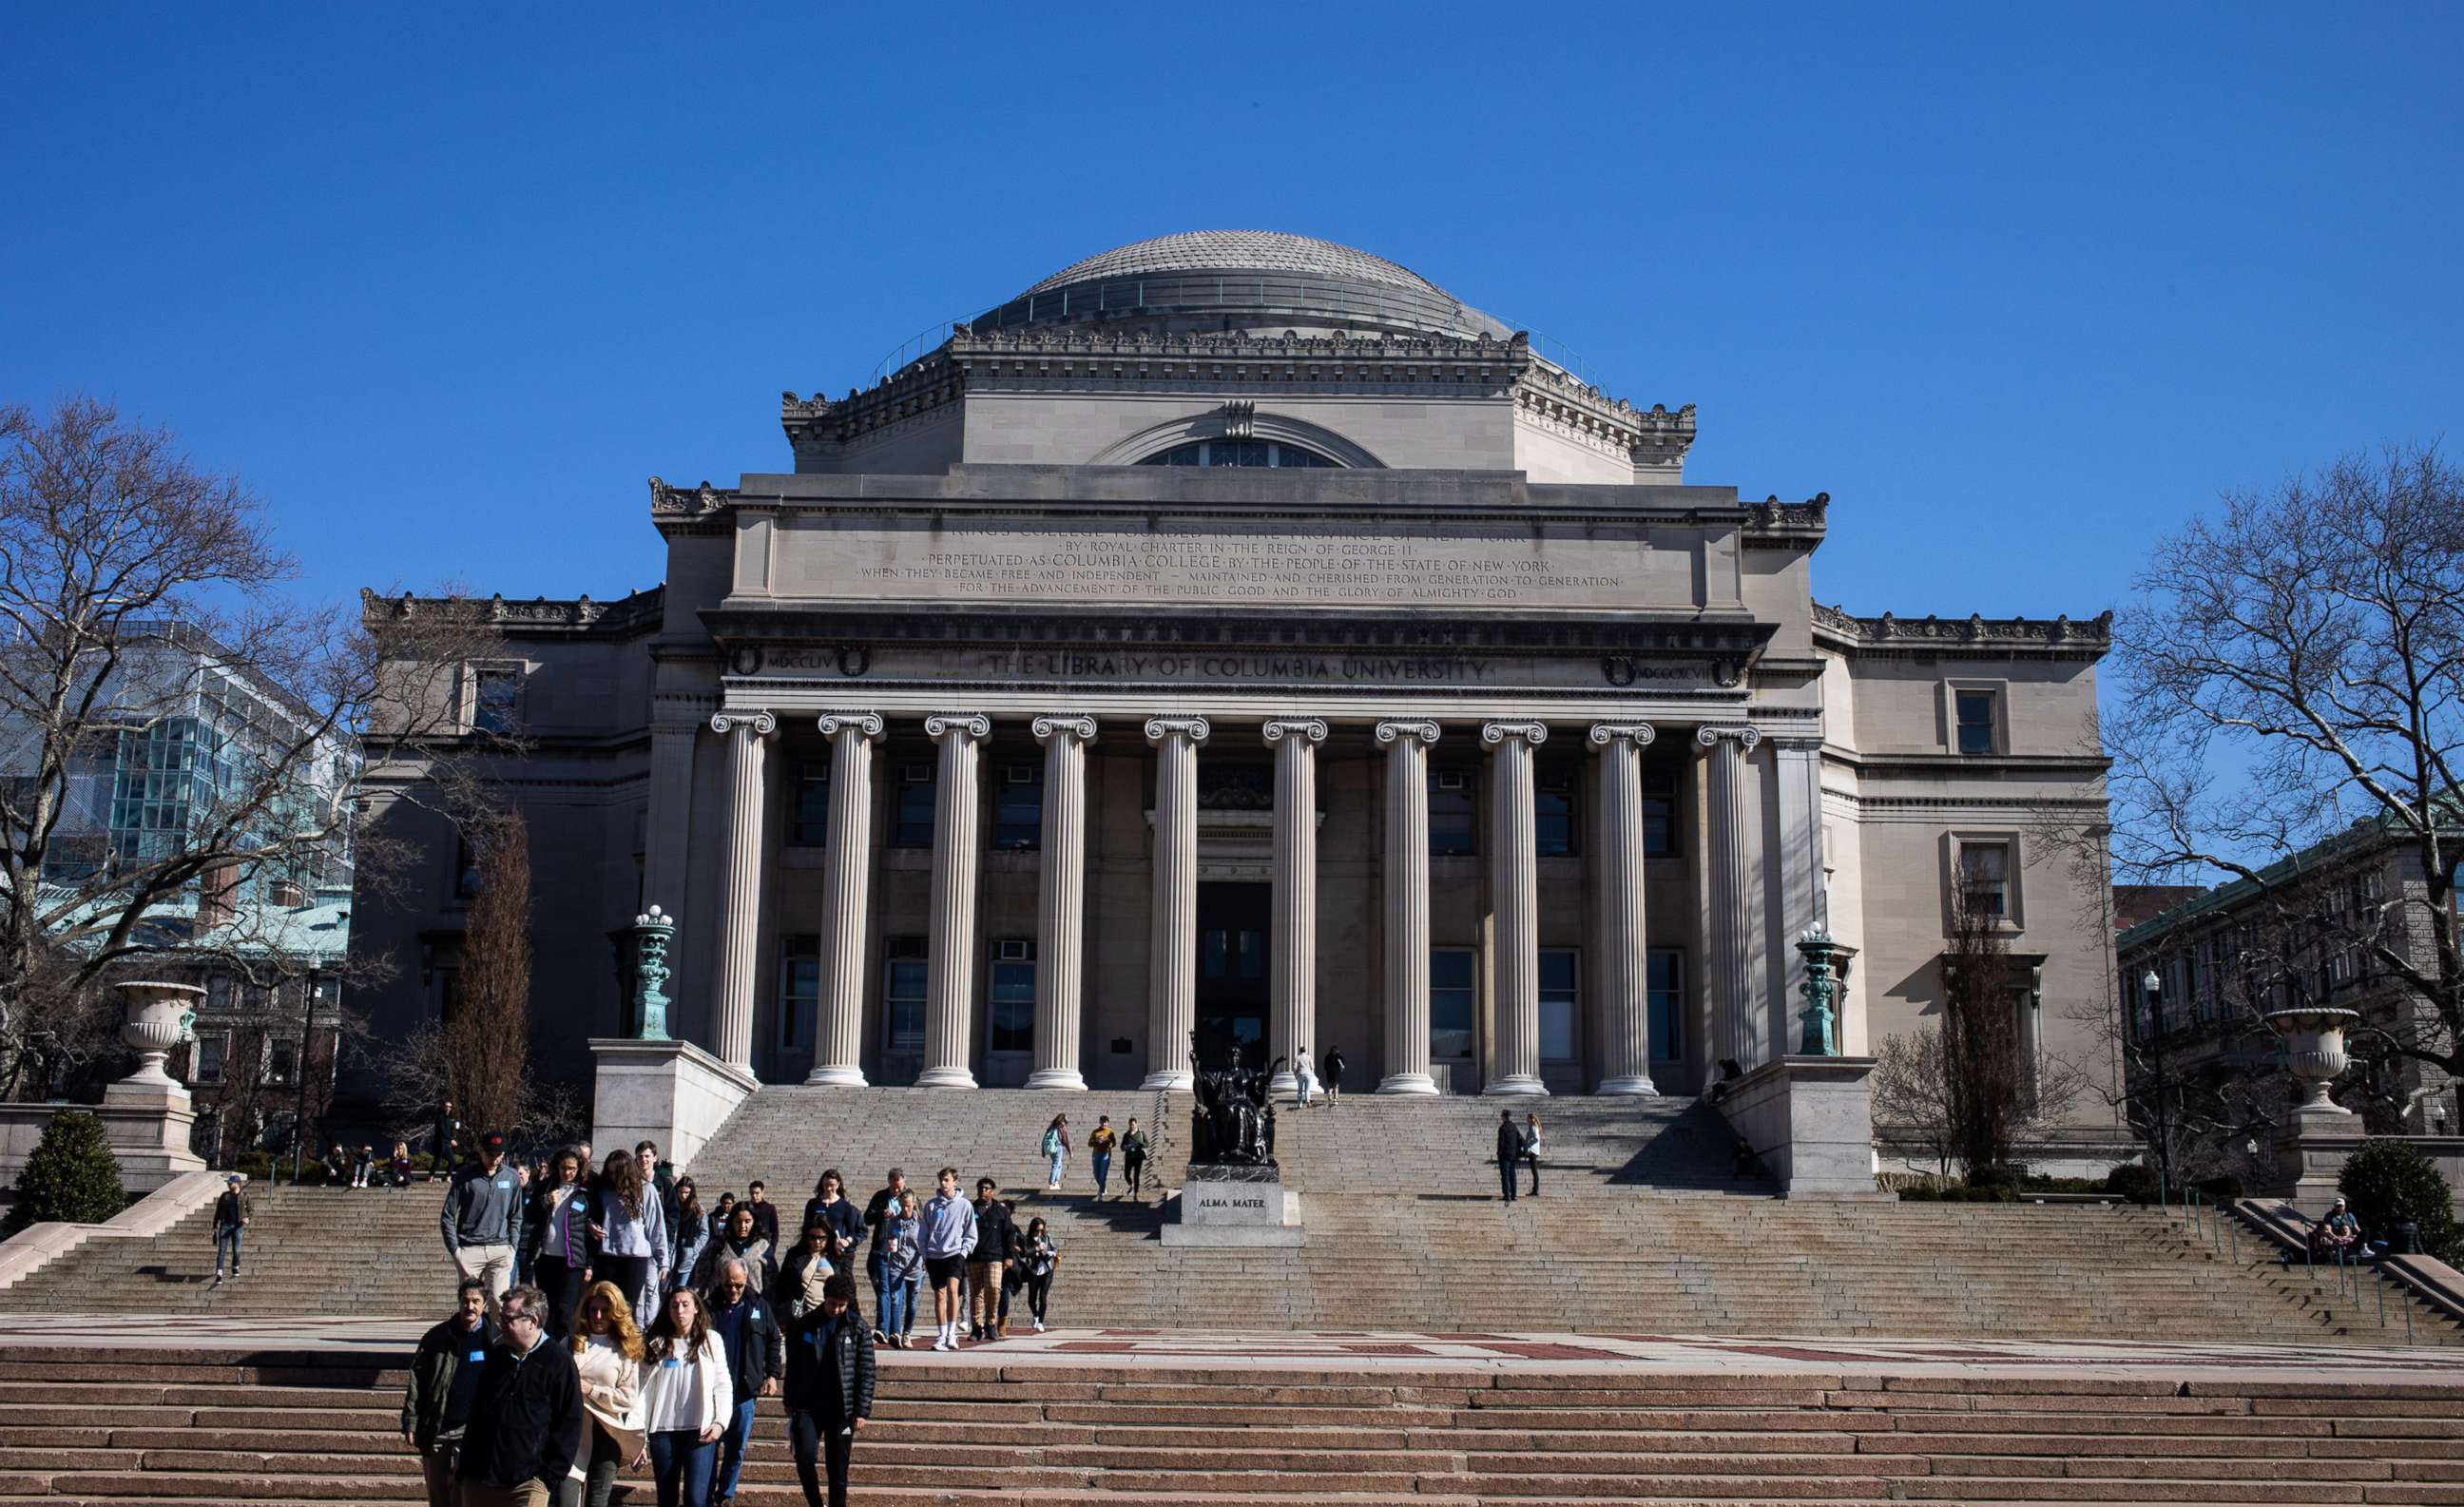 PHOTO: In this file photo, people walk on the Columbia University campus on March 9, 2020 in New York. 